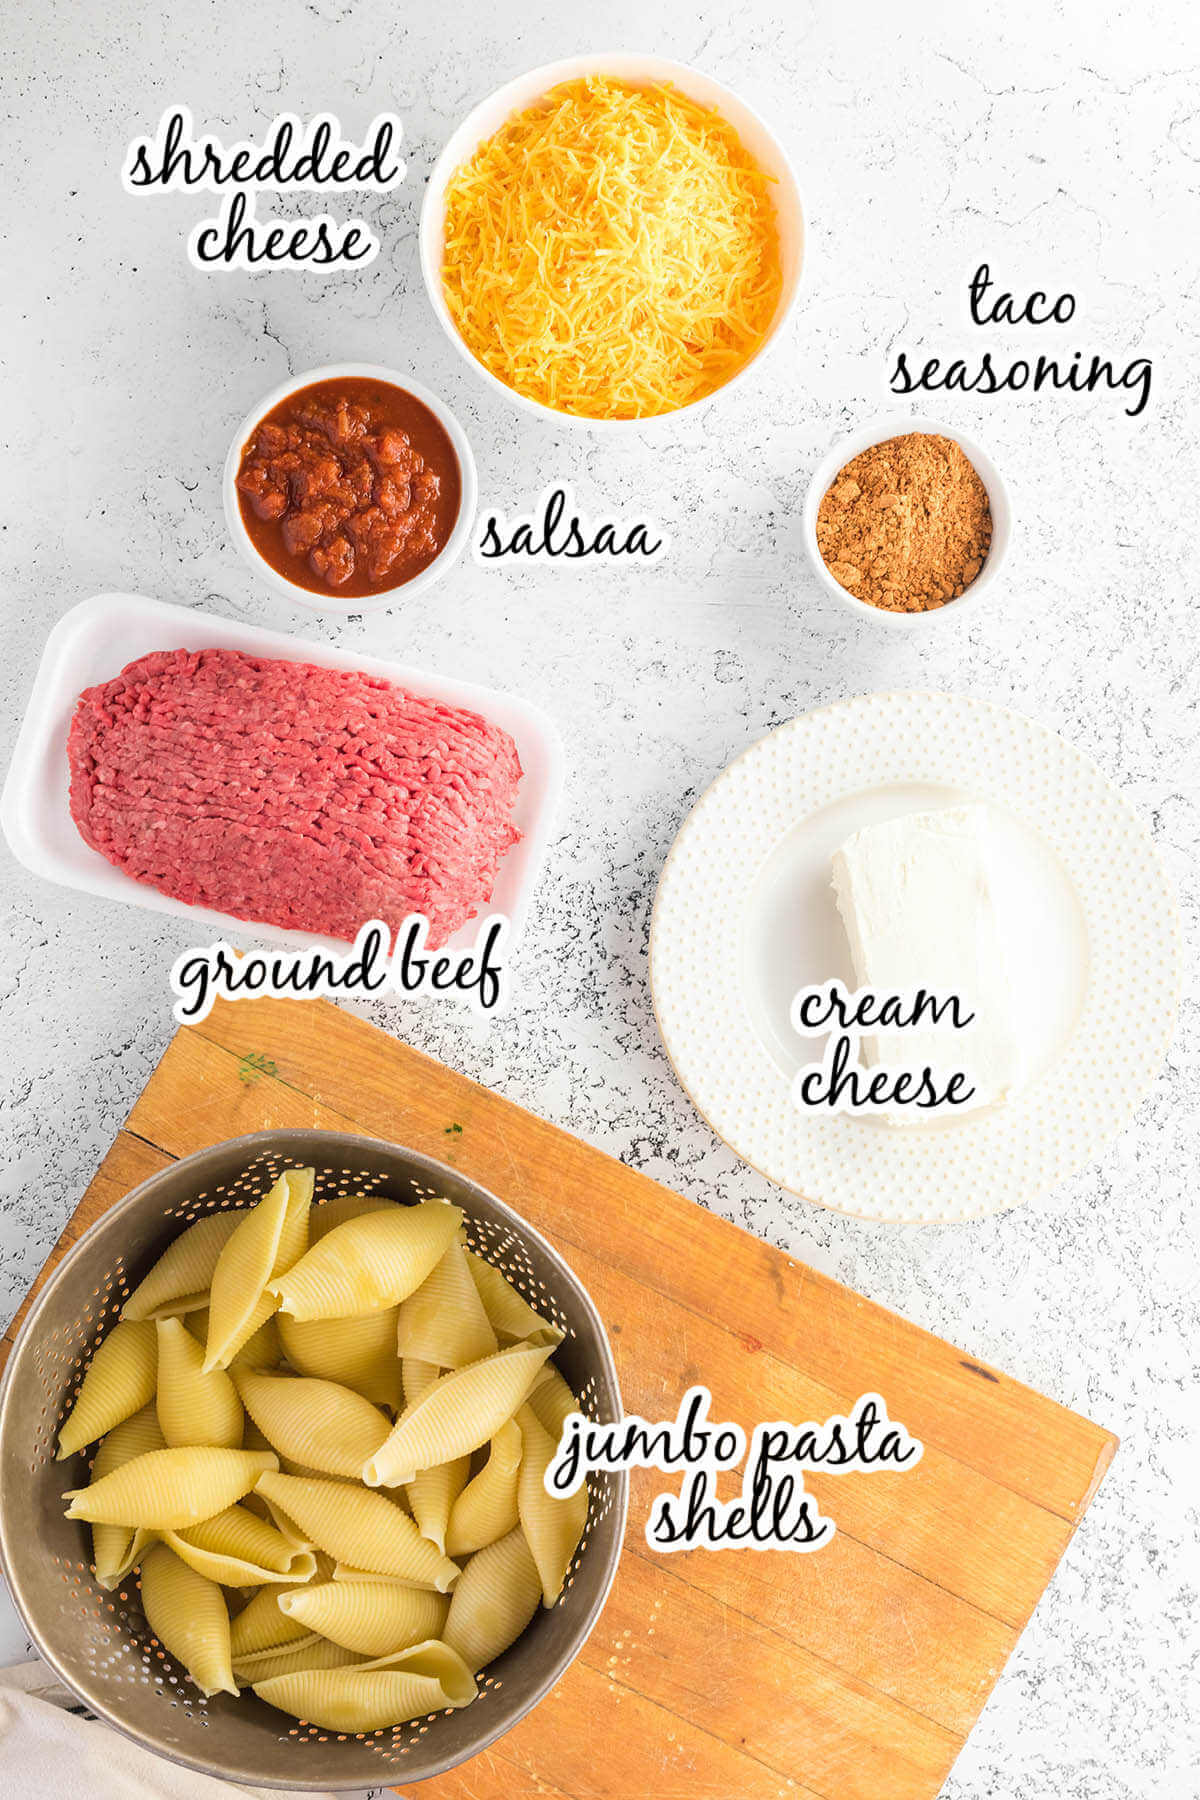 Ingredients for Mexican pasta recipe. With print overlay.